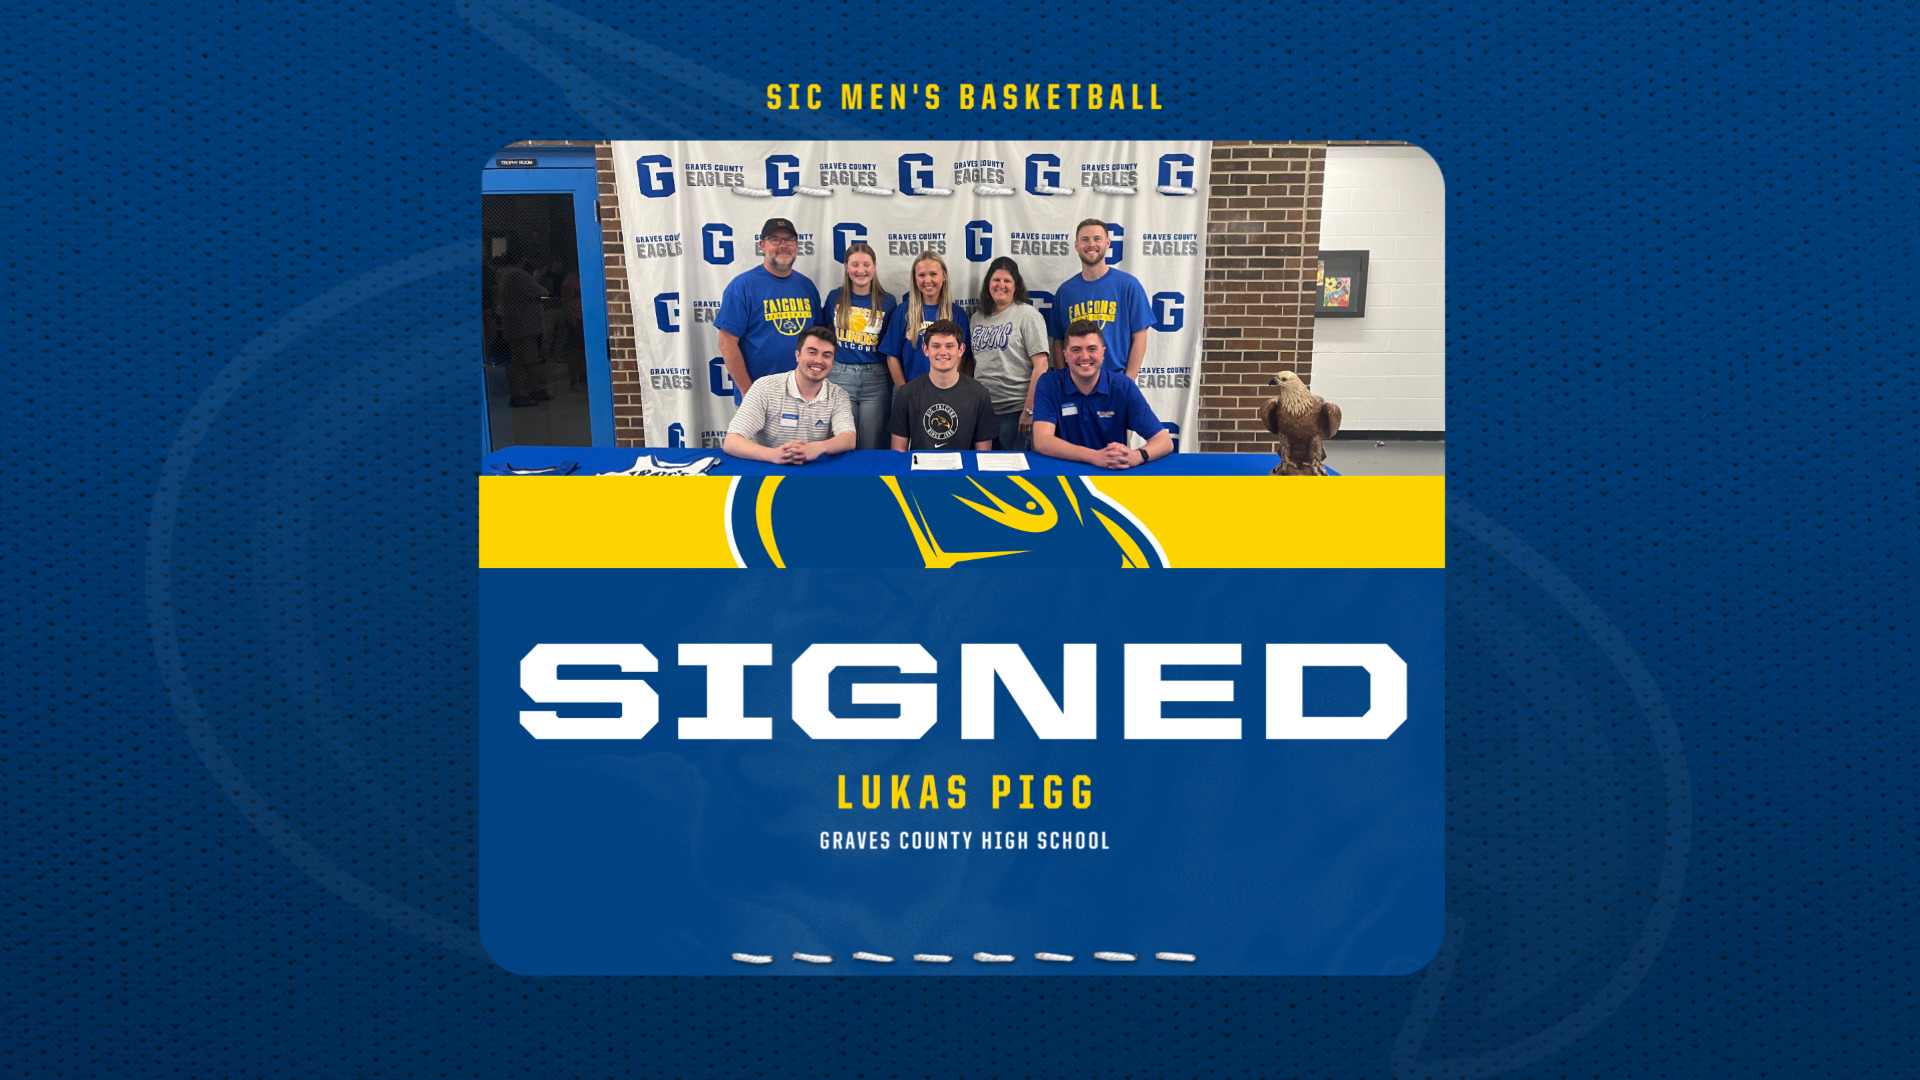 Southeastern IllinoisSlide 9 - Southeastern Illinois College Men's Basketball Signs Lukas Pigg from Graves County High School